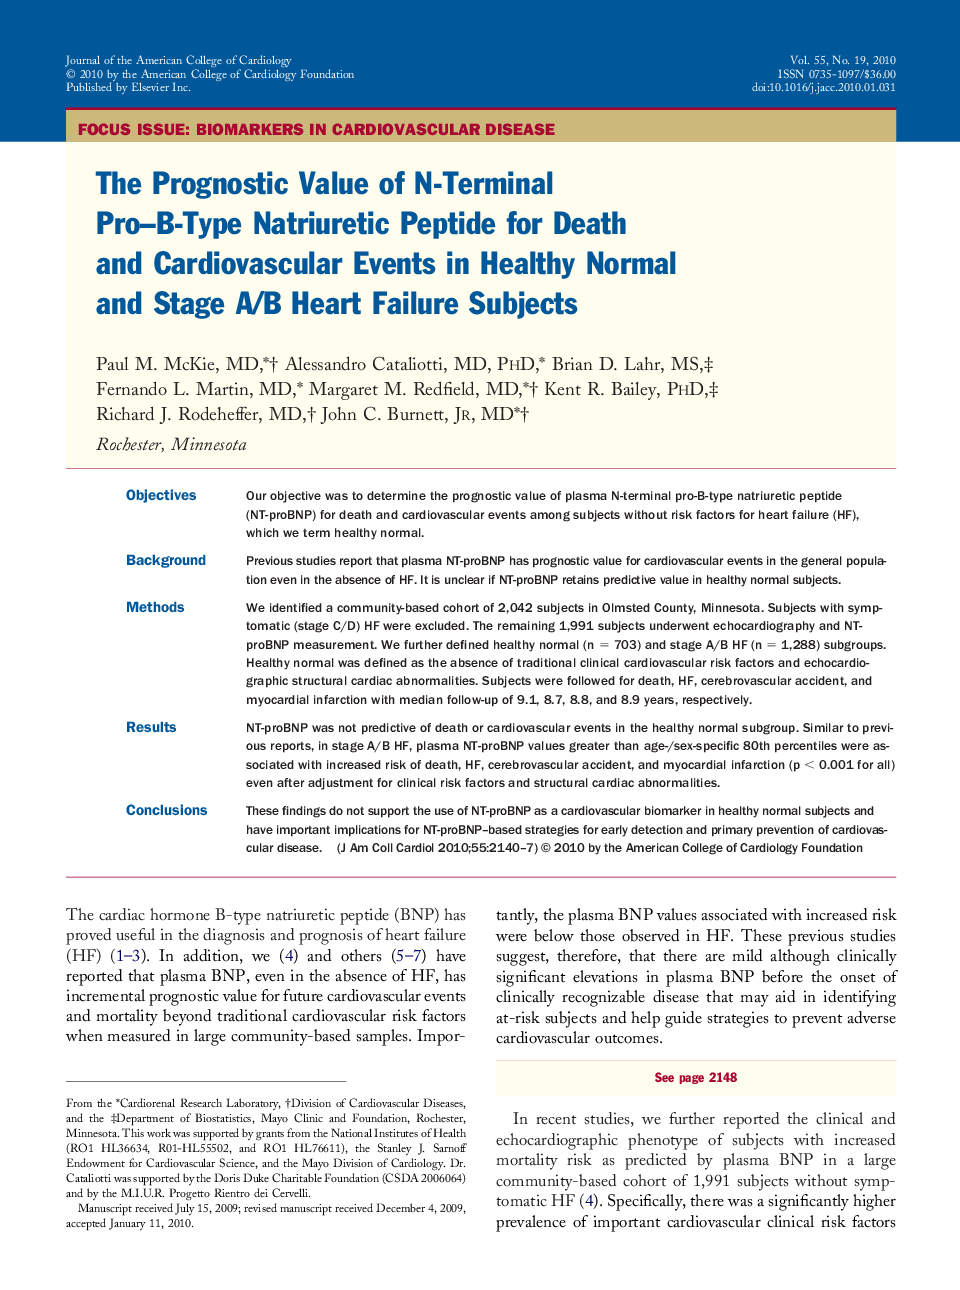 The Prognostic Value of N-Terminal Pro–B-Type Natriuretic Peptide for Death and Cardiovascular Events in Healthy Normal and Stage A/B Heart Failure Subjects 